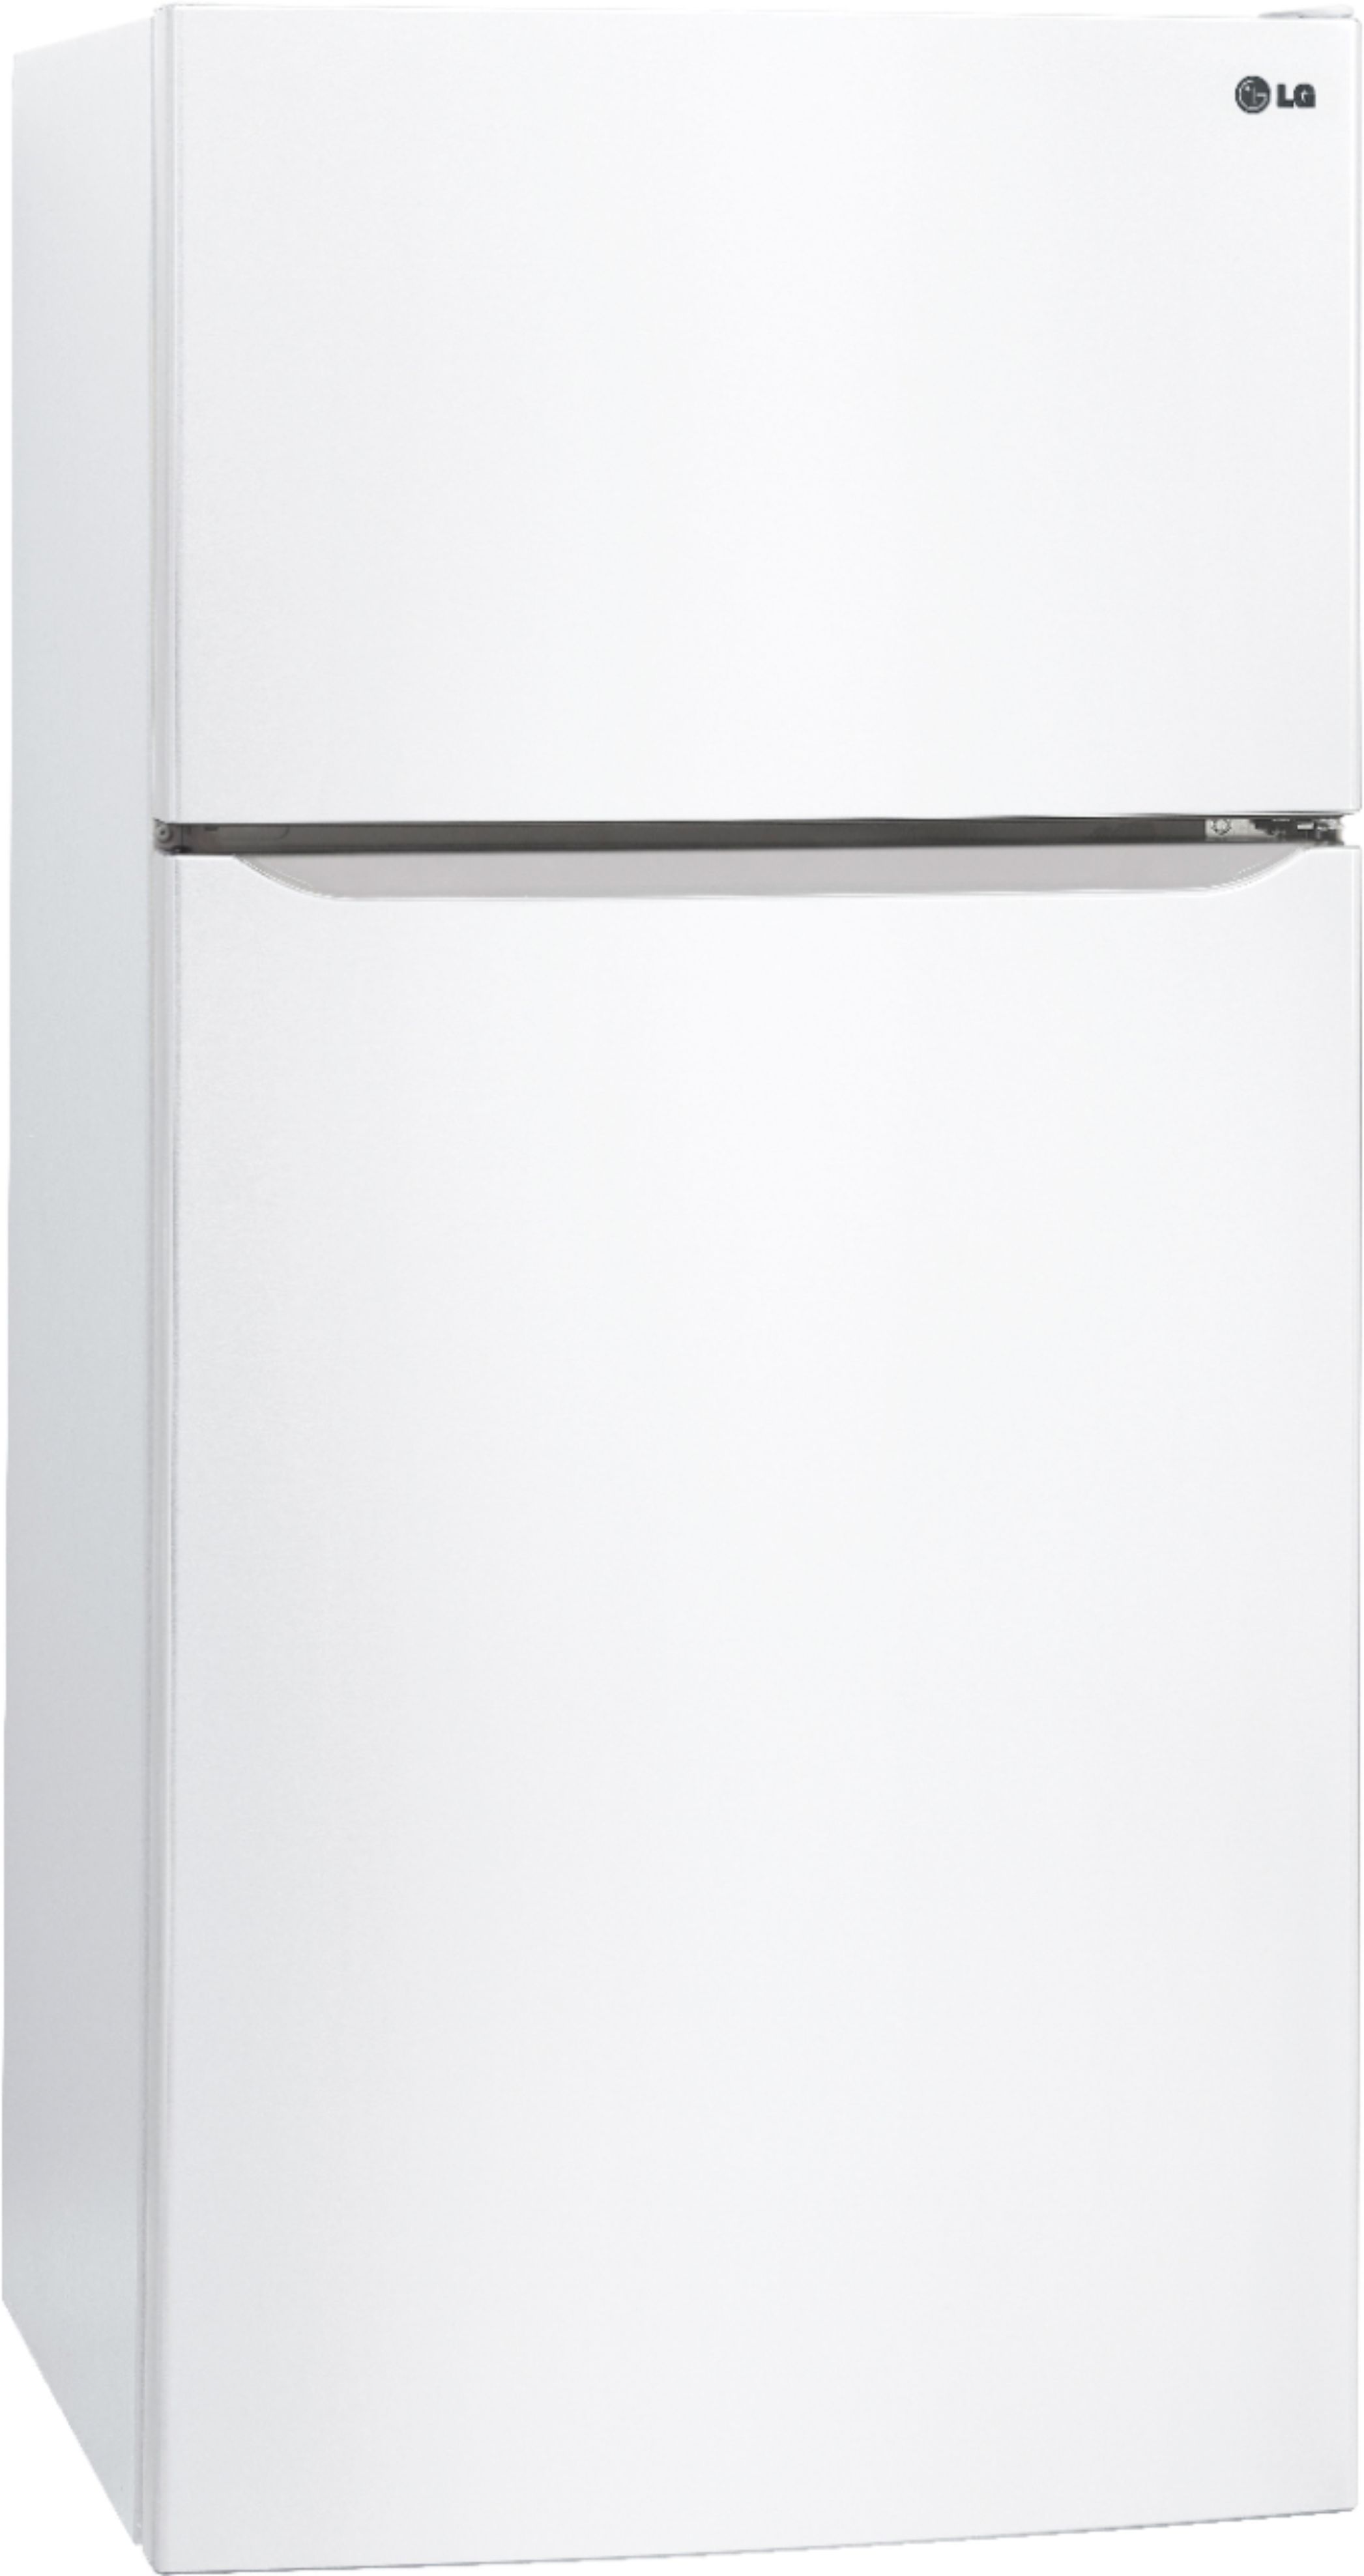 Angle View: LG - 23.8 Cu. Ft. Top-Freezer Refrigerator with Ice Maker - Smooth White